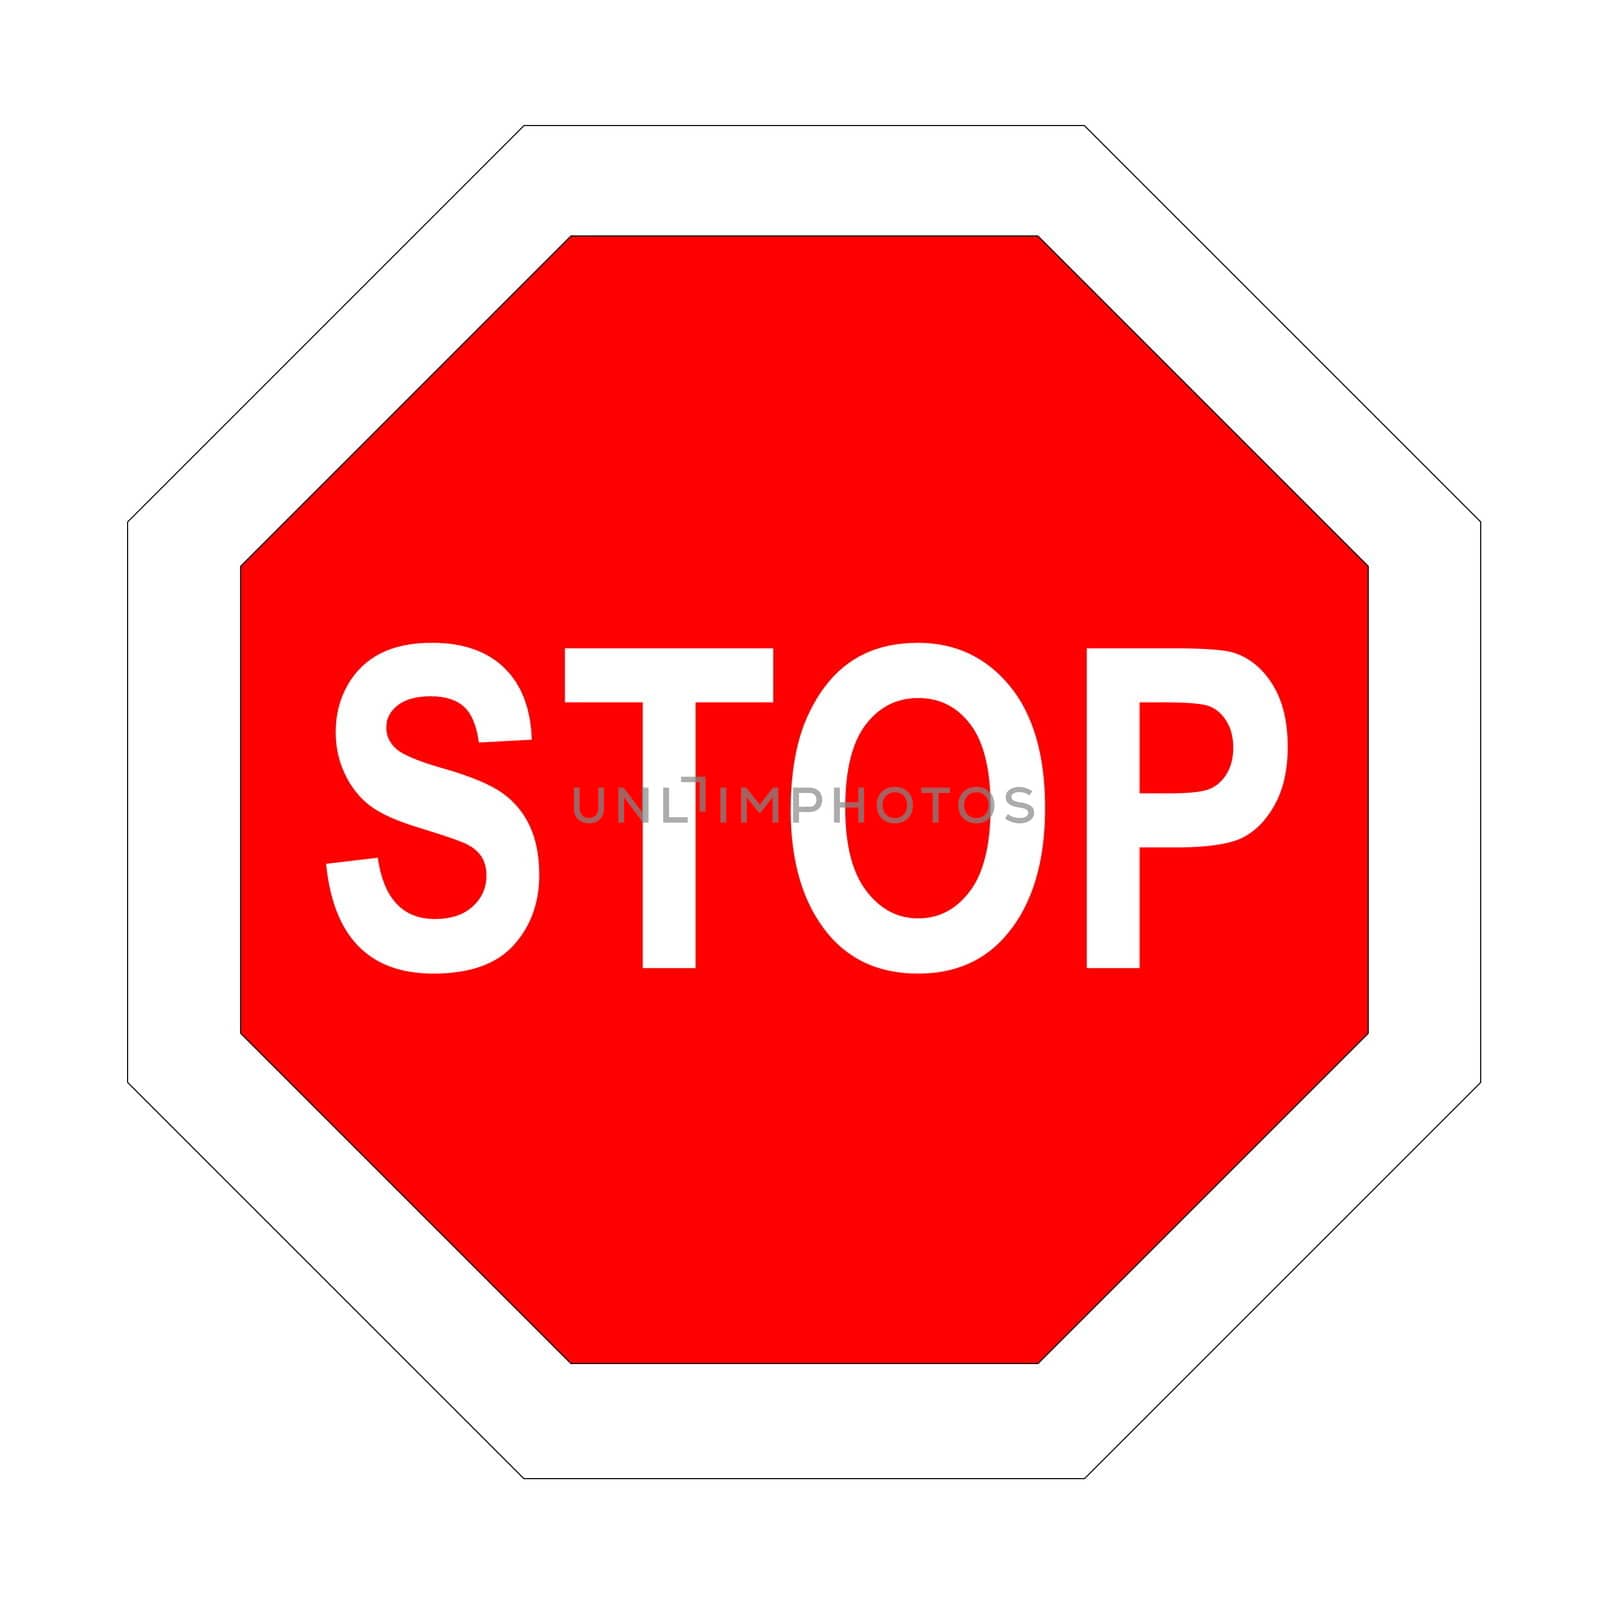 Big stop road sign isolated in white background